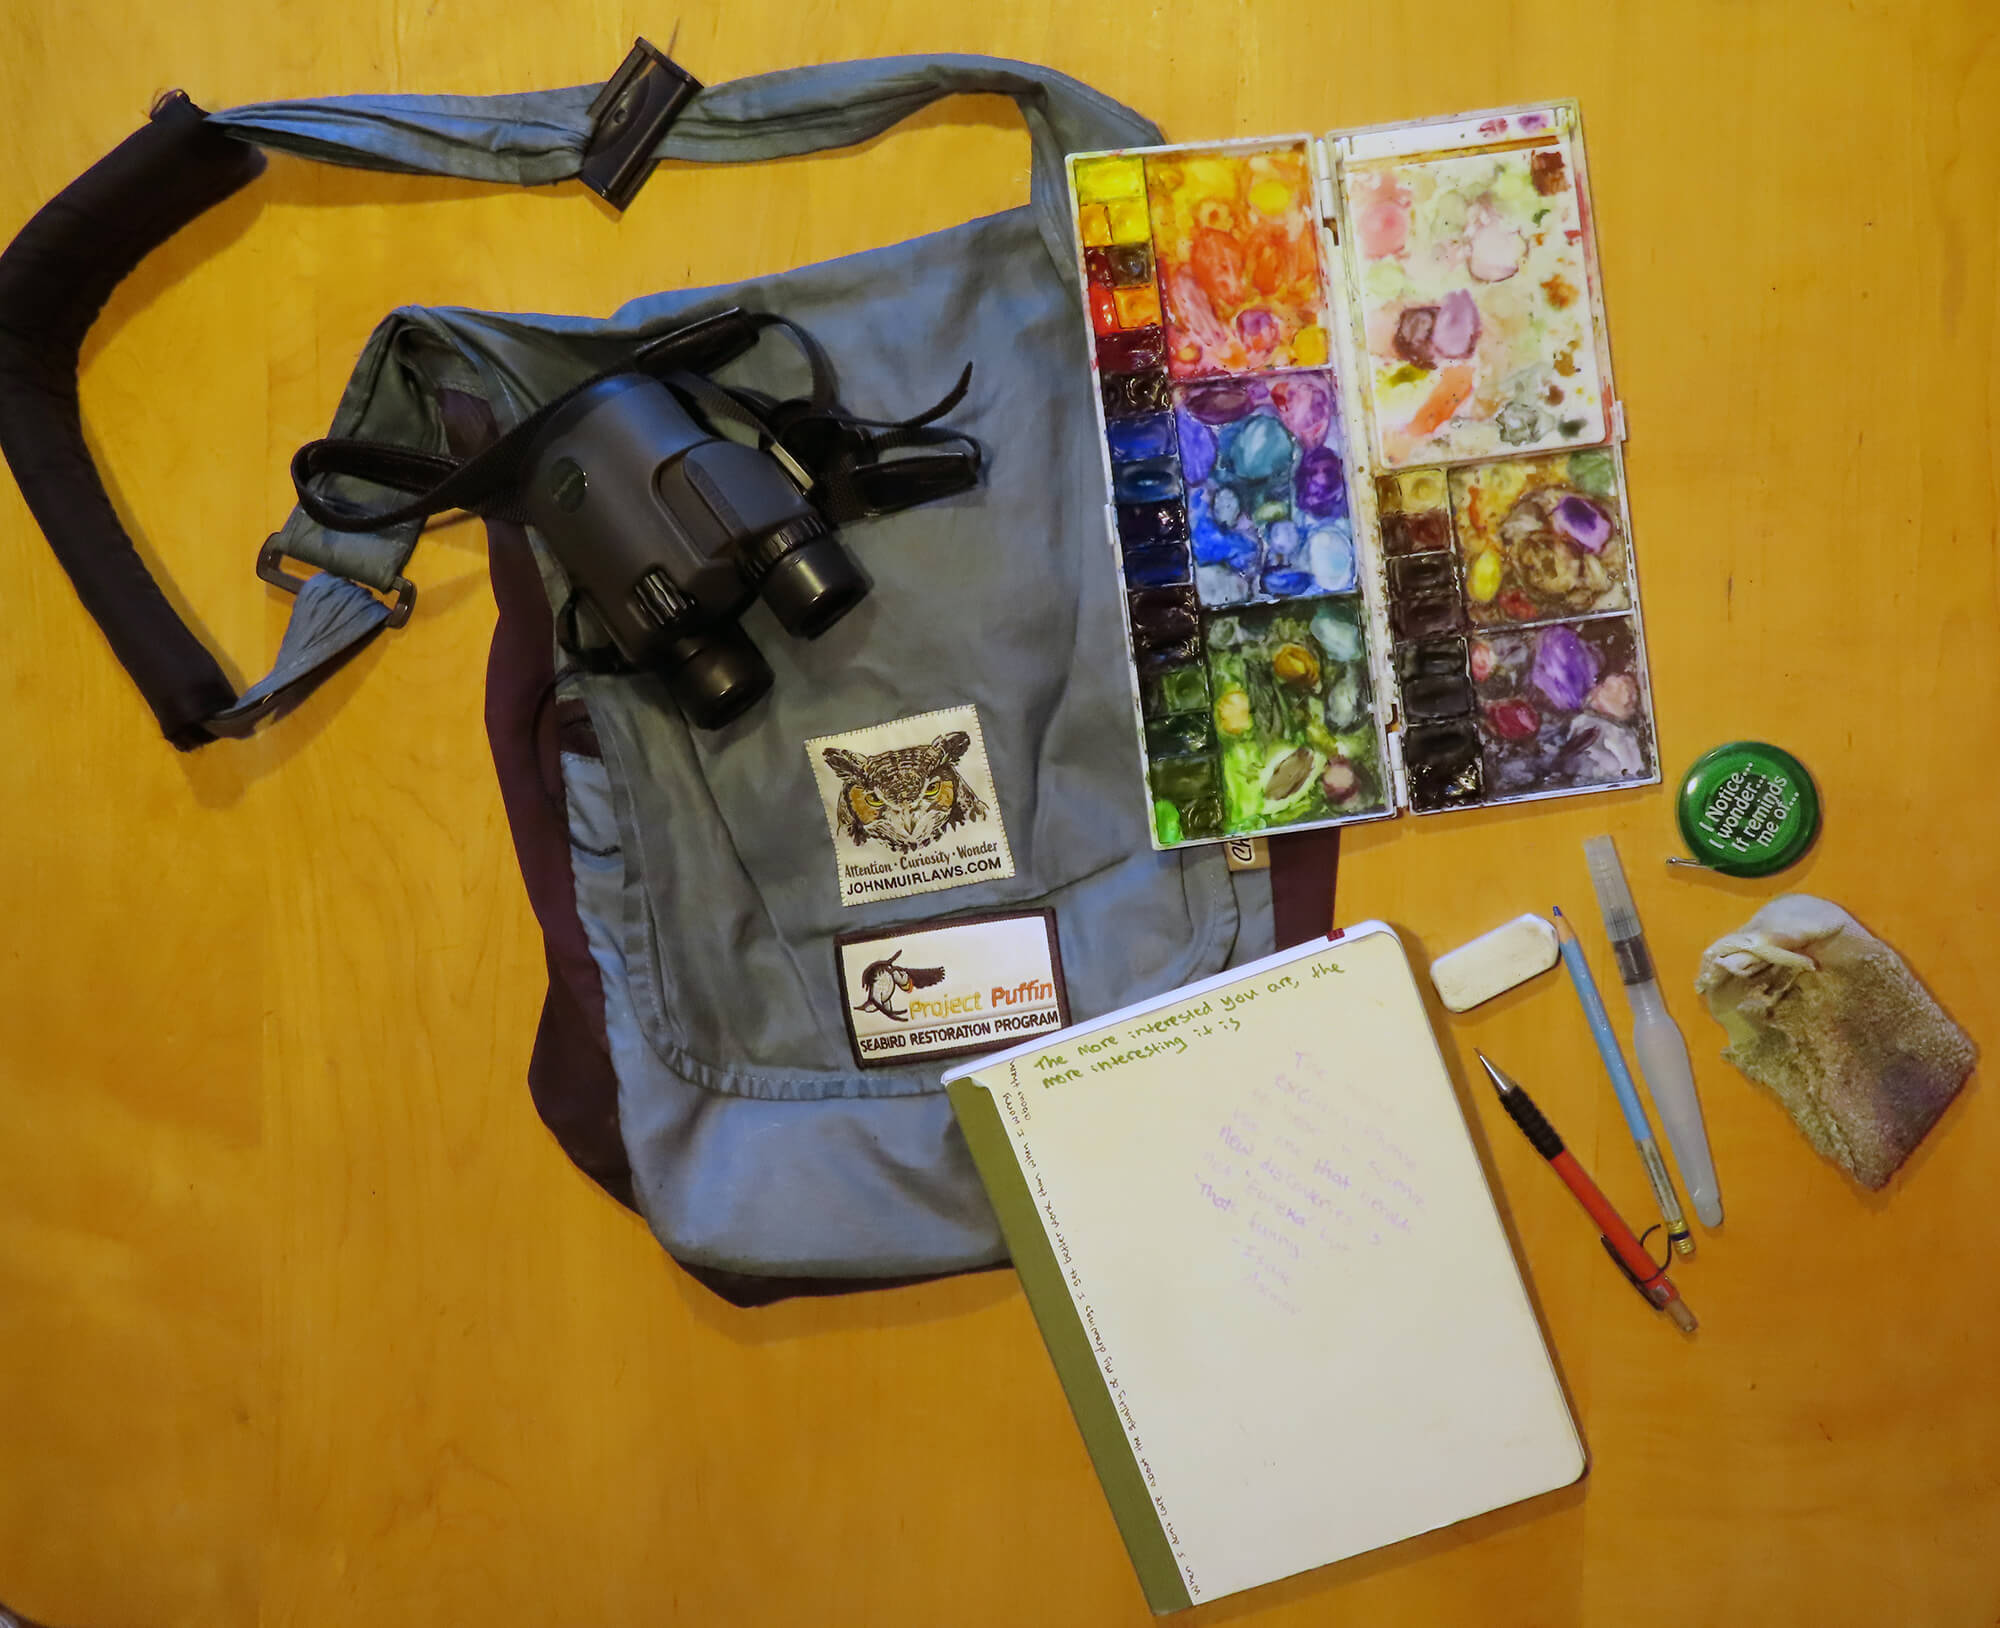 Keeping a Nature Journal with Sherrie York - Farnsworth Art Museum